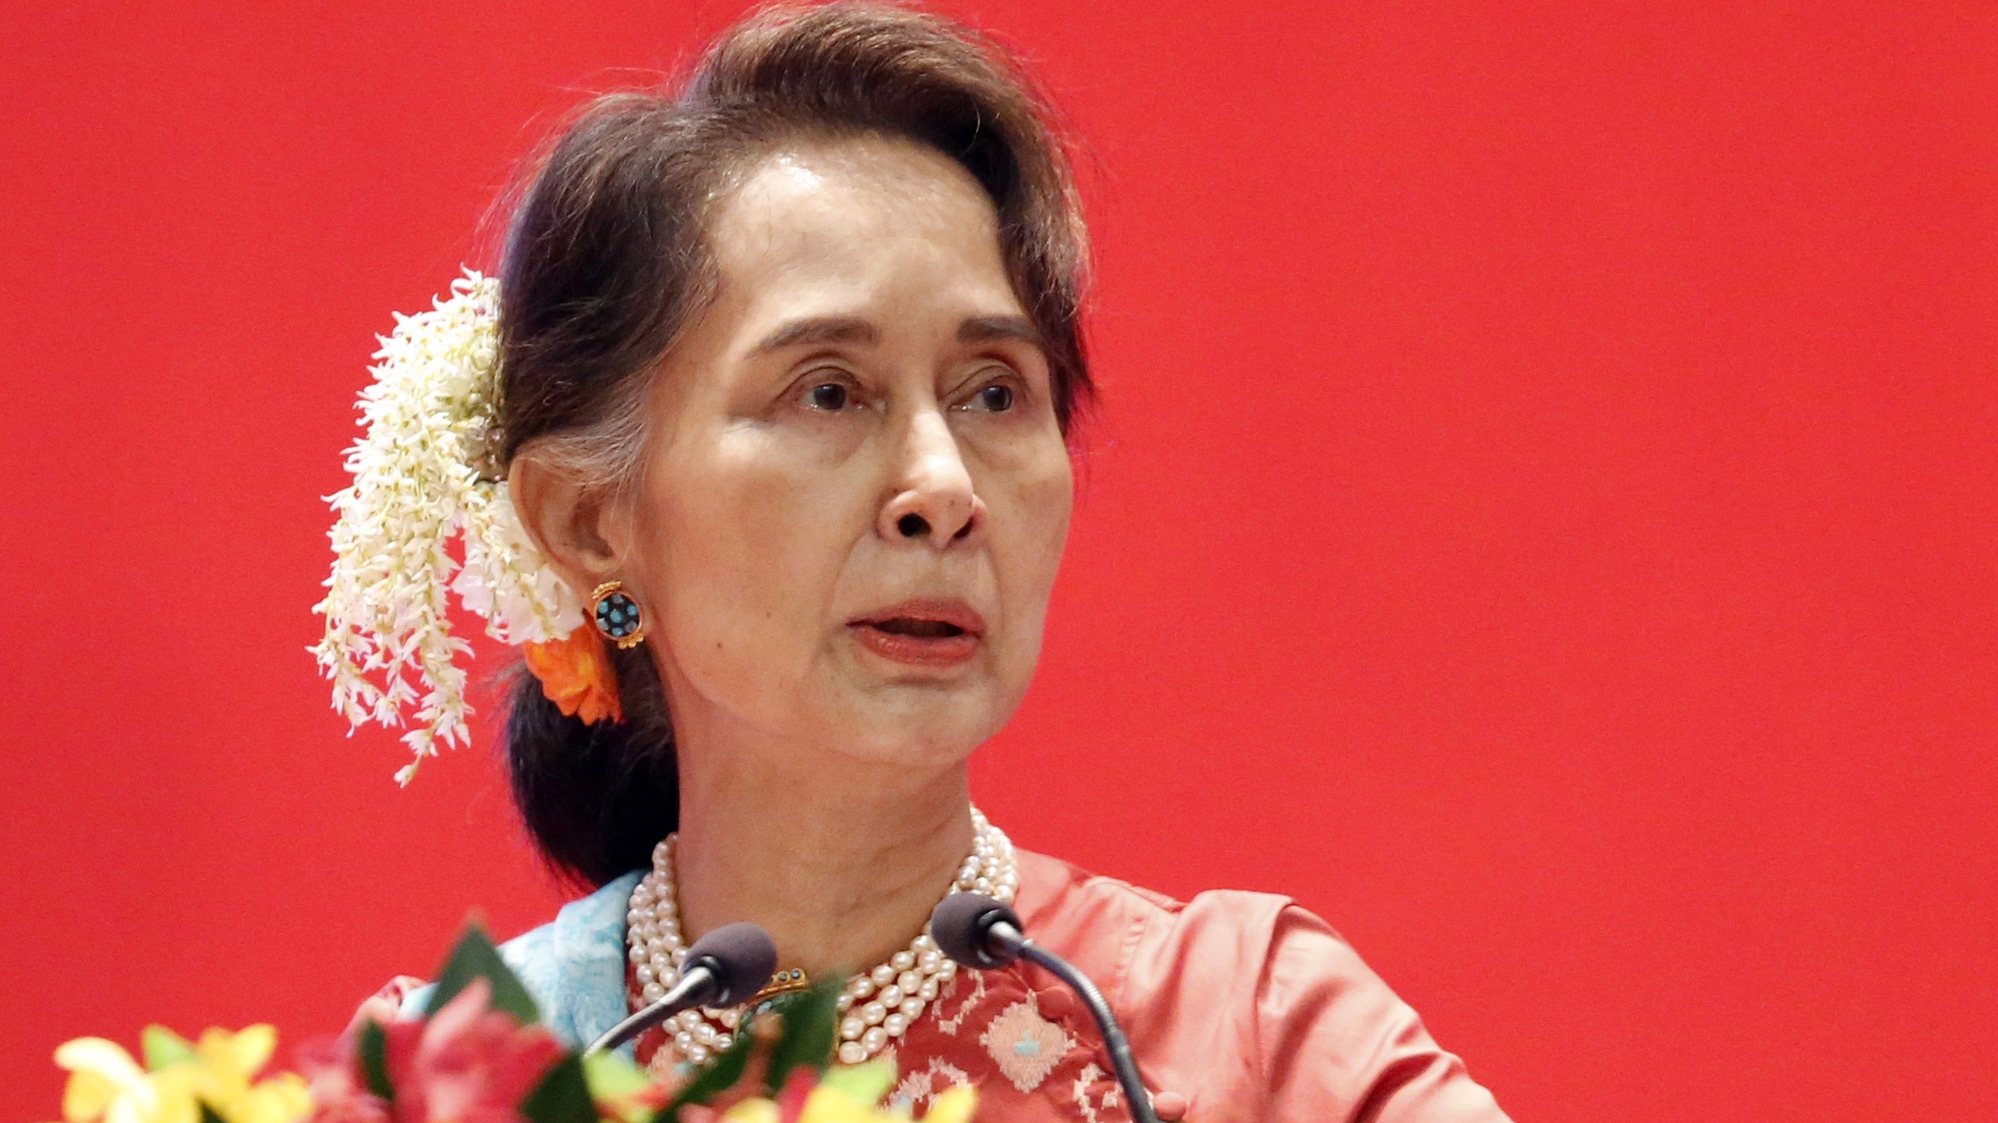 epa09911408 (FILE) - Myanmar State Counselor Aung San Suu Kyi speaks during the opening ceremony of Invest Myanmar Summit 2019 at the Myanmar International Convention Centre (MICC) in Naypyitaw, Myanmar, 28 January 2019 (reissued 27 April 2022). On 27 April 2022, Suu Kyi was found guilty of corruption and sentenced to five years in prison under section 55 of the Anti-corruption Law.  EPA/HEIN HTET